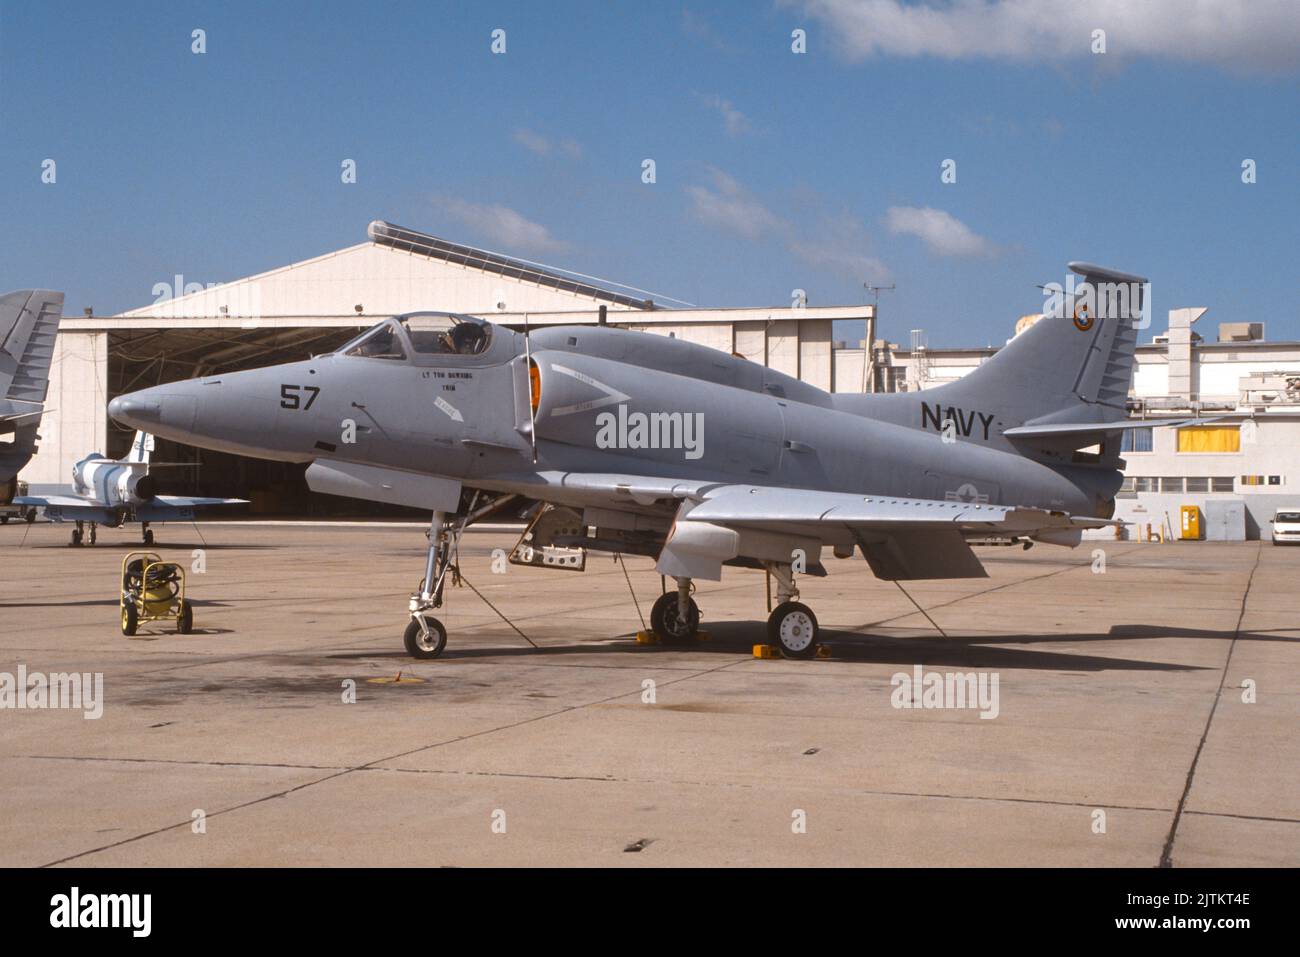 Douglas A-4 Skyhawk aggressor aircraft used by instructors at the Navy Fighter Weapons School, AKA Top Gun, NAS Miramar in San Diego, California Stock Photo